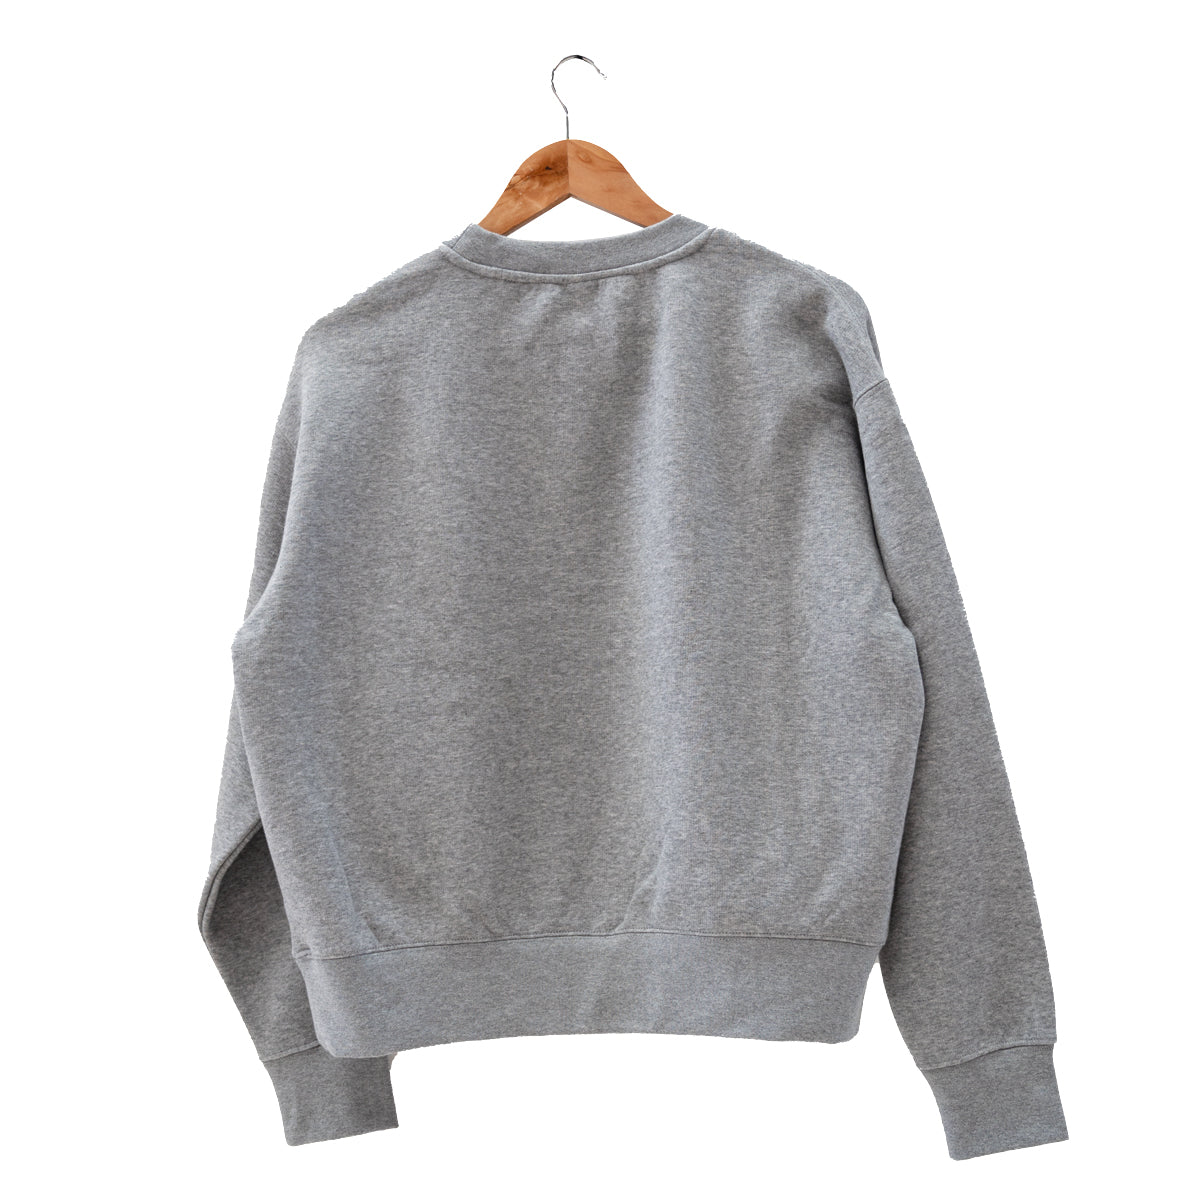 Incandescent | Crew Neck Size Extra Large - Tiff Manuell